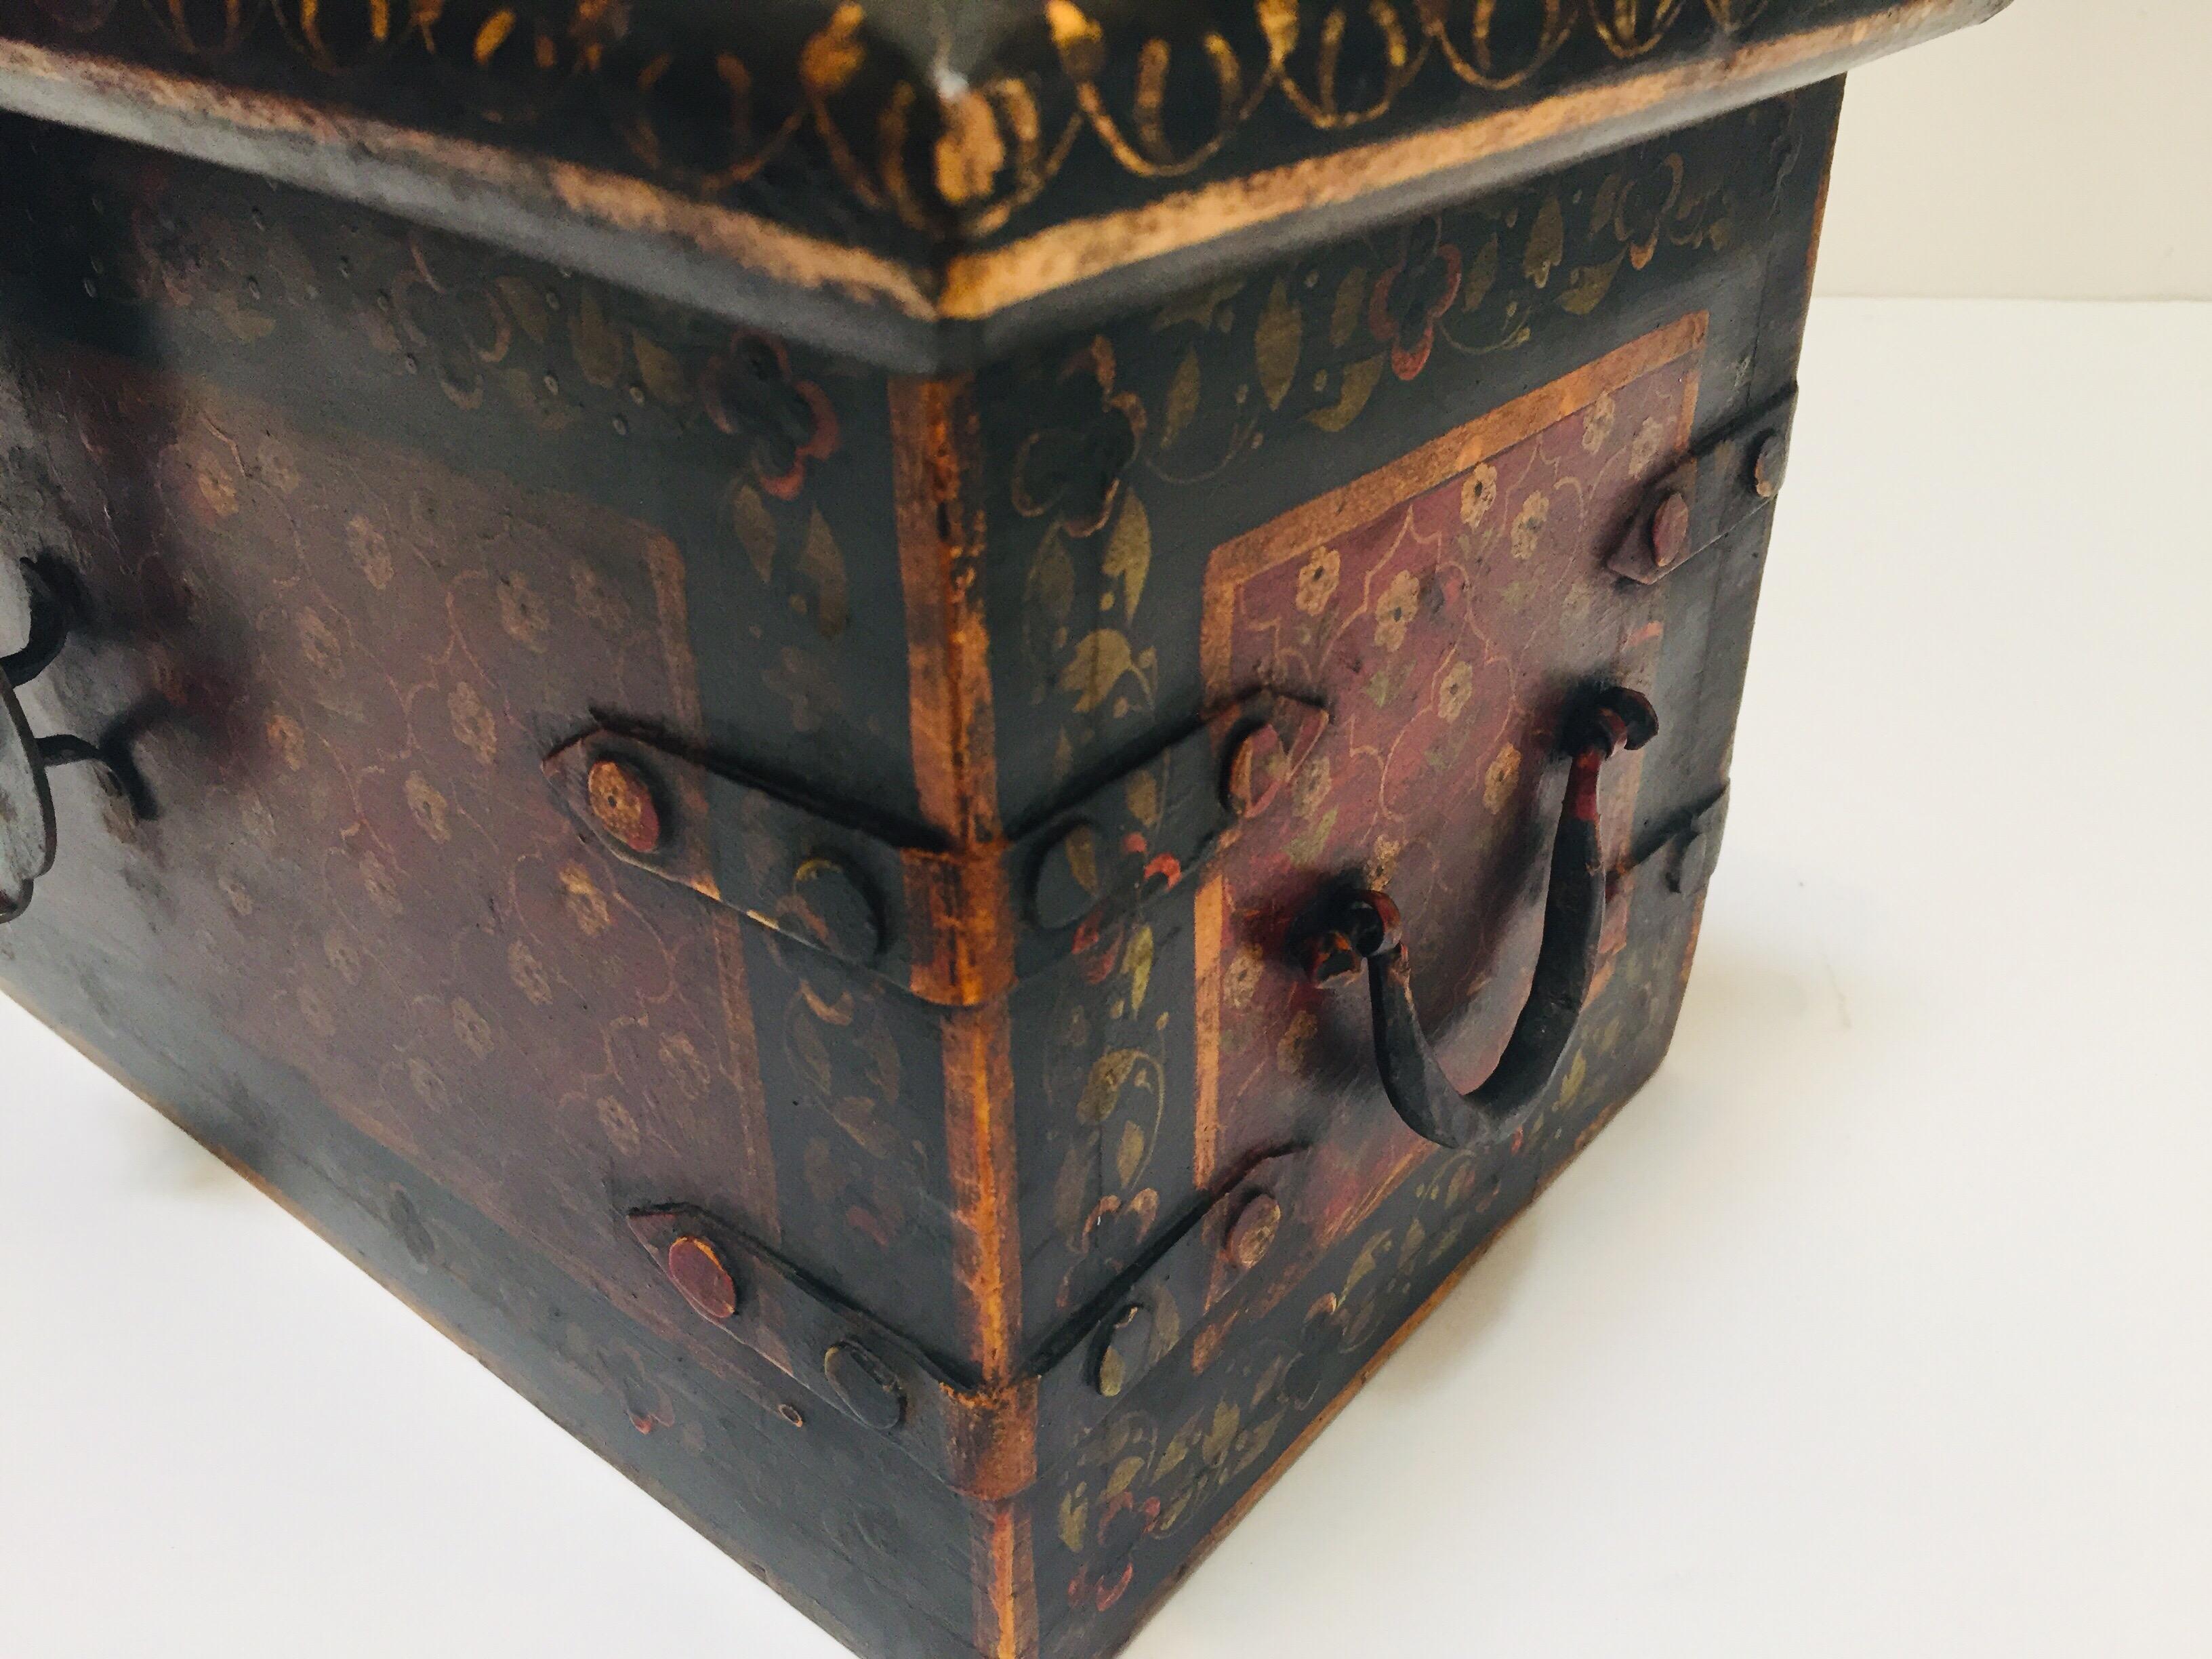 Hand-Crafted Rajasthani Hand-Painted Large Jewelry Dowry Box